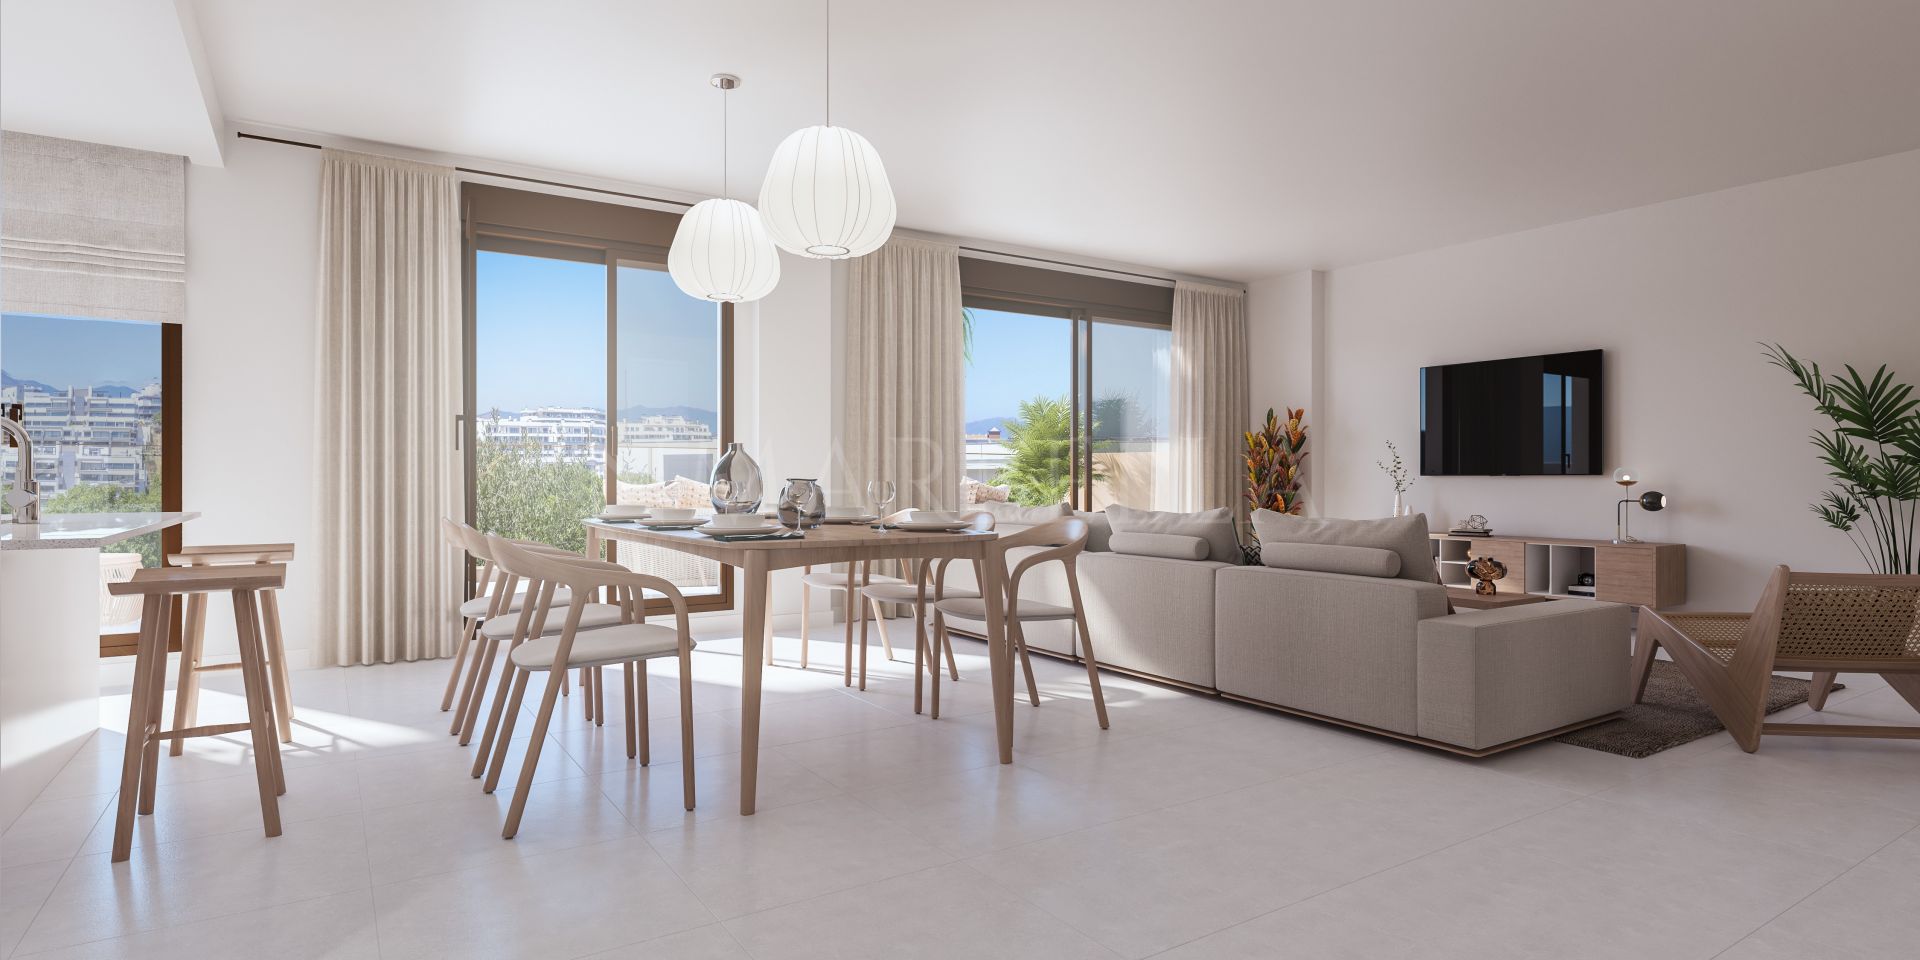 New apartment under construction for sale in Estepona port area